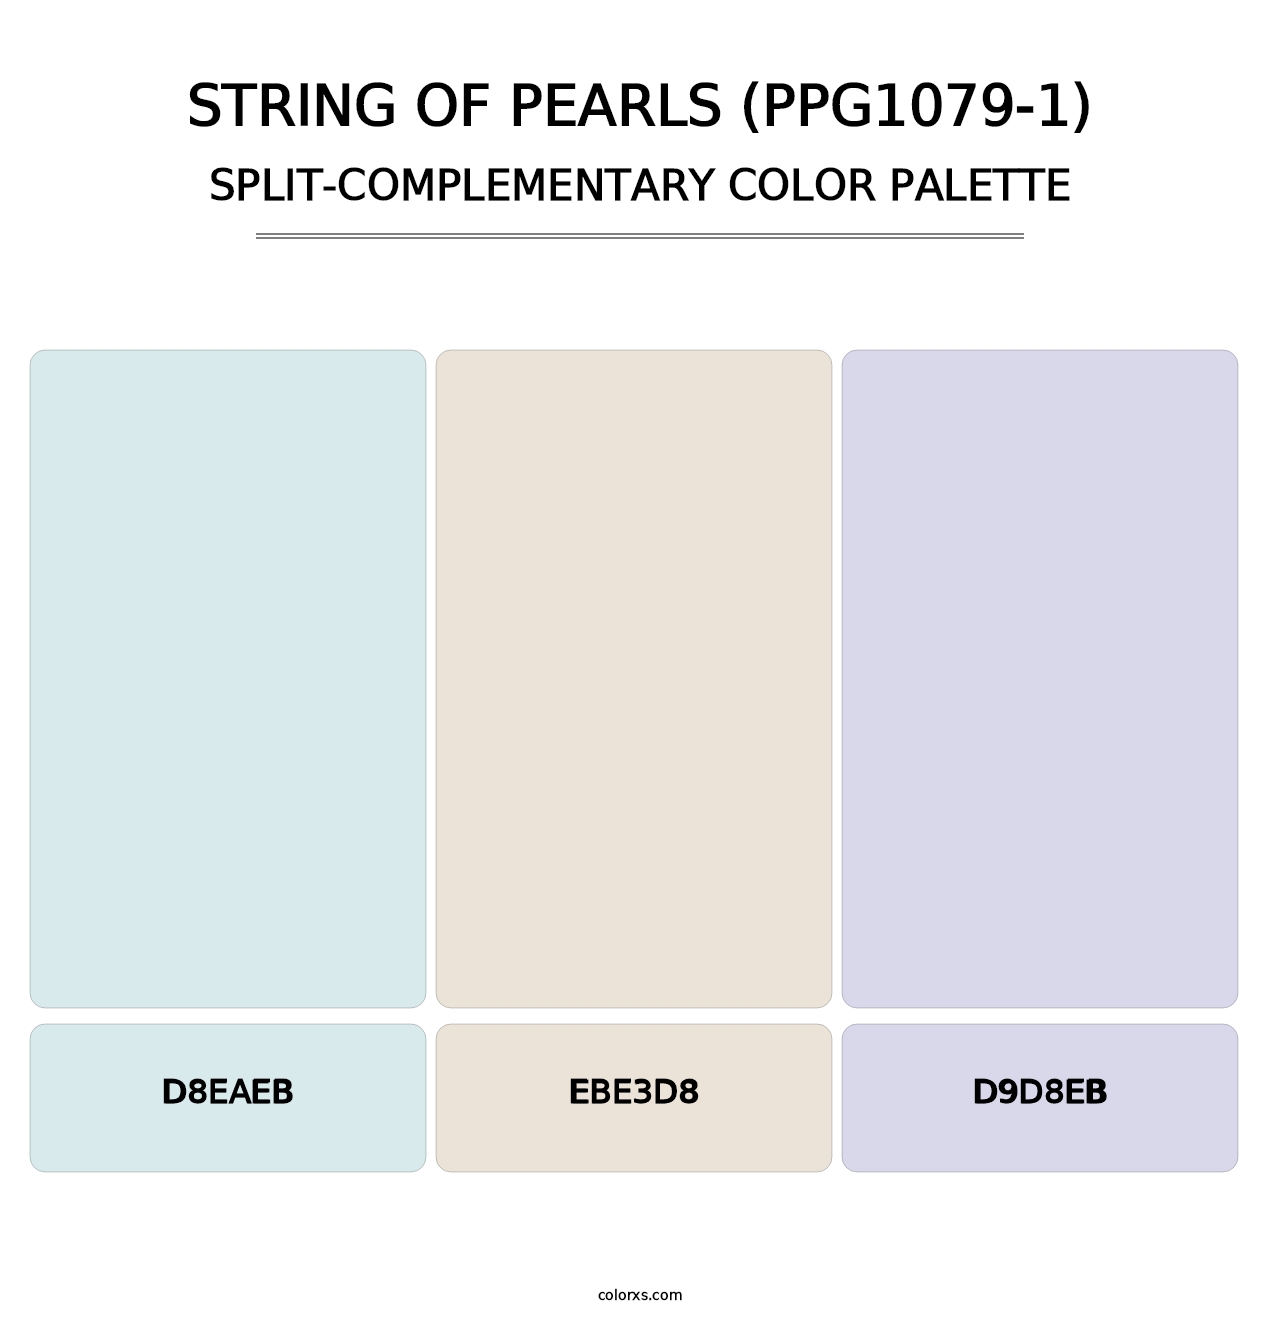 String Of Pearls (PPG1079-1) - Split-Complementary Color Palette